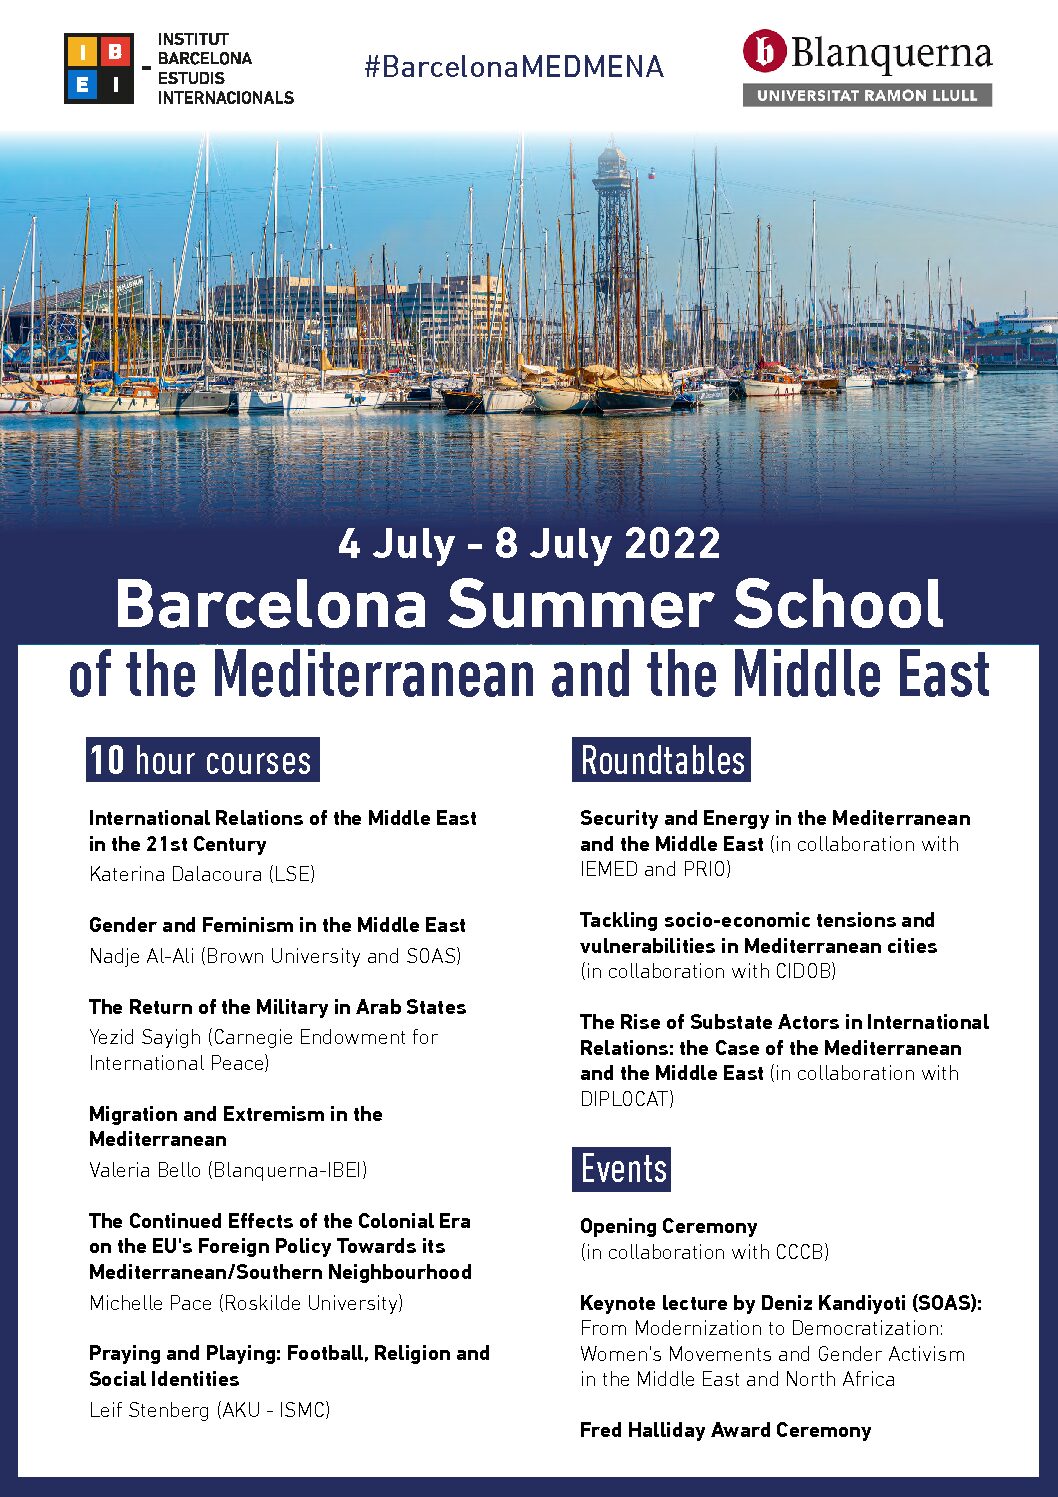 2022 Barcelona Summer School of the Mediterranean and the Middle East